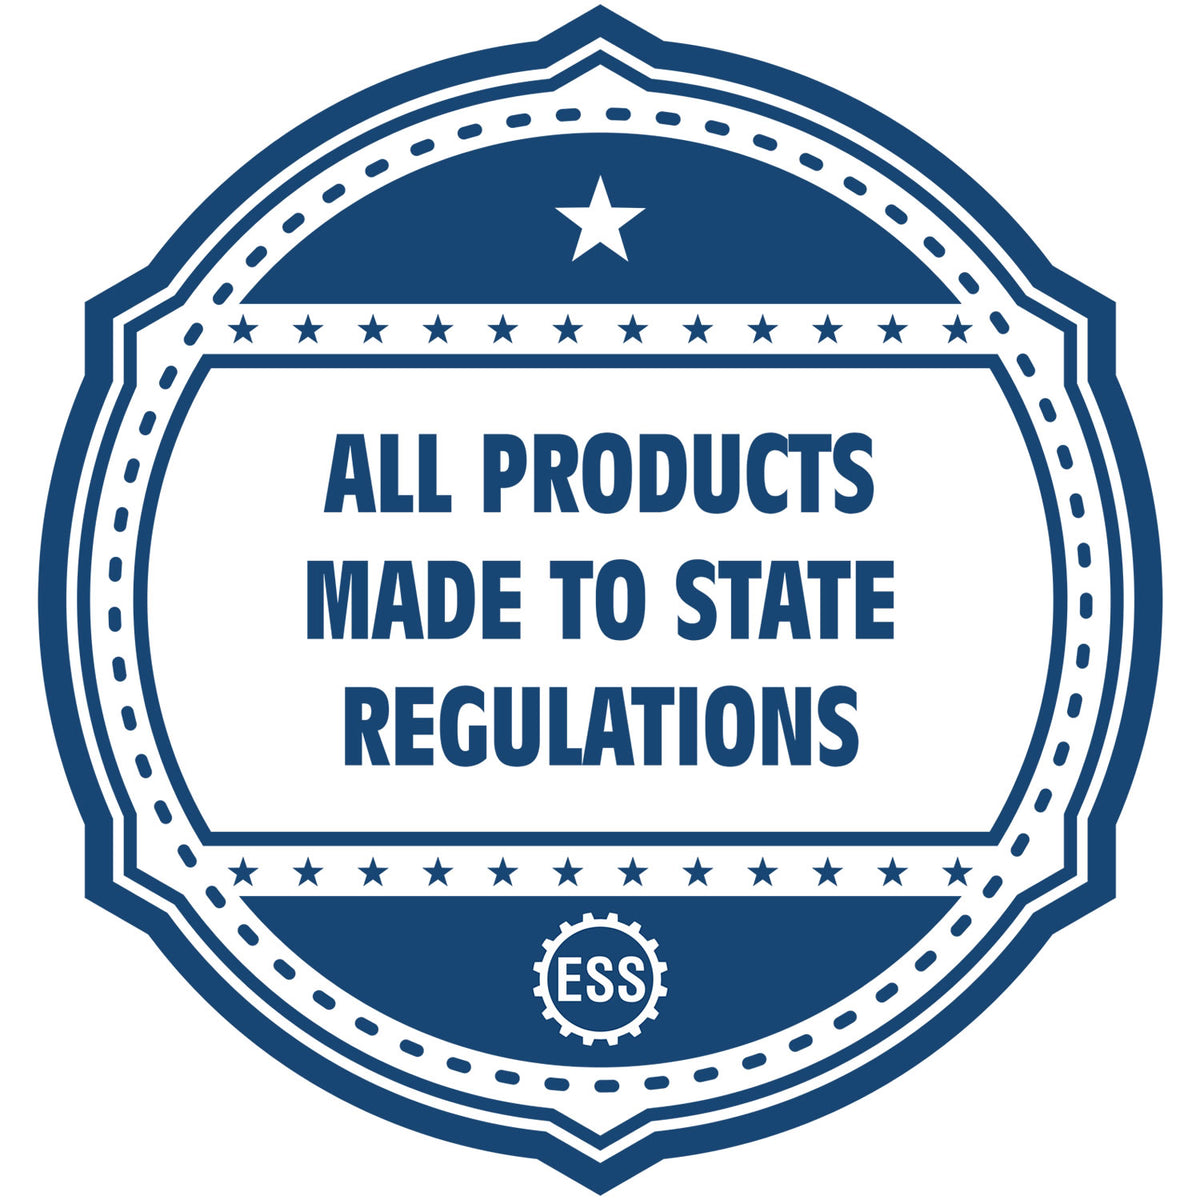 A blue icon or badge for the Heavy Duty Cast Iron South Dakota Geologist Seal Embosser showing that this product is made in compliance with state regulations.